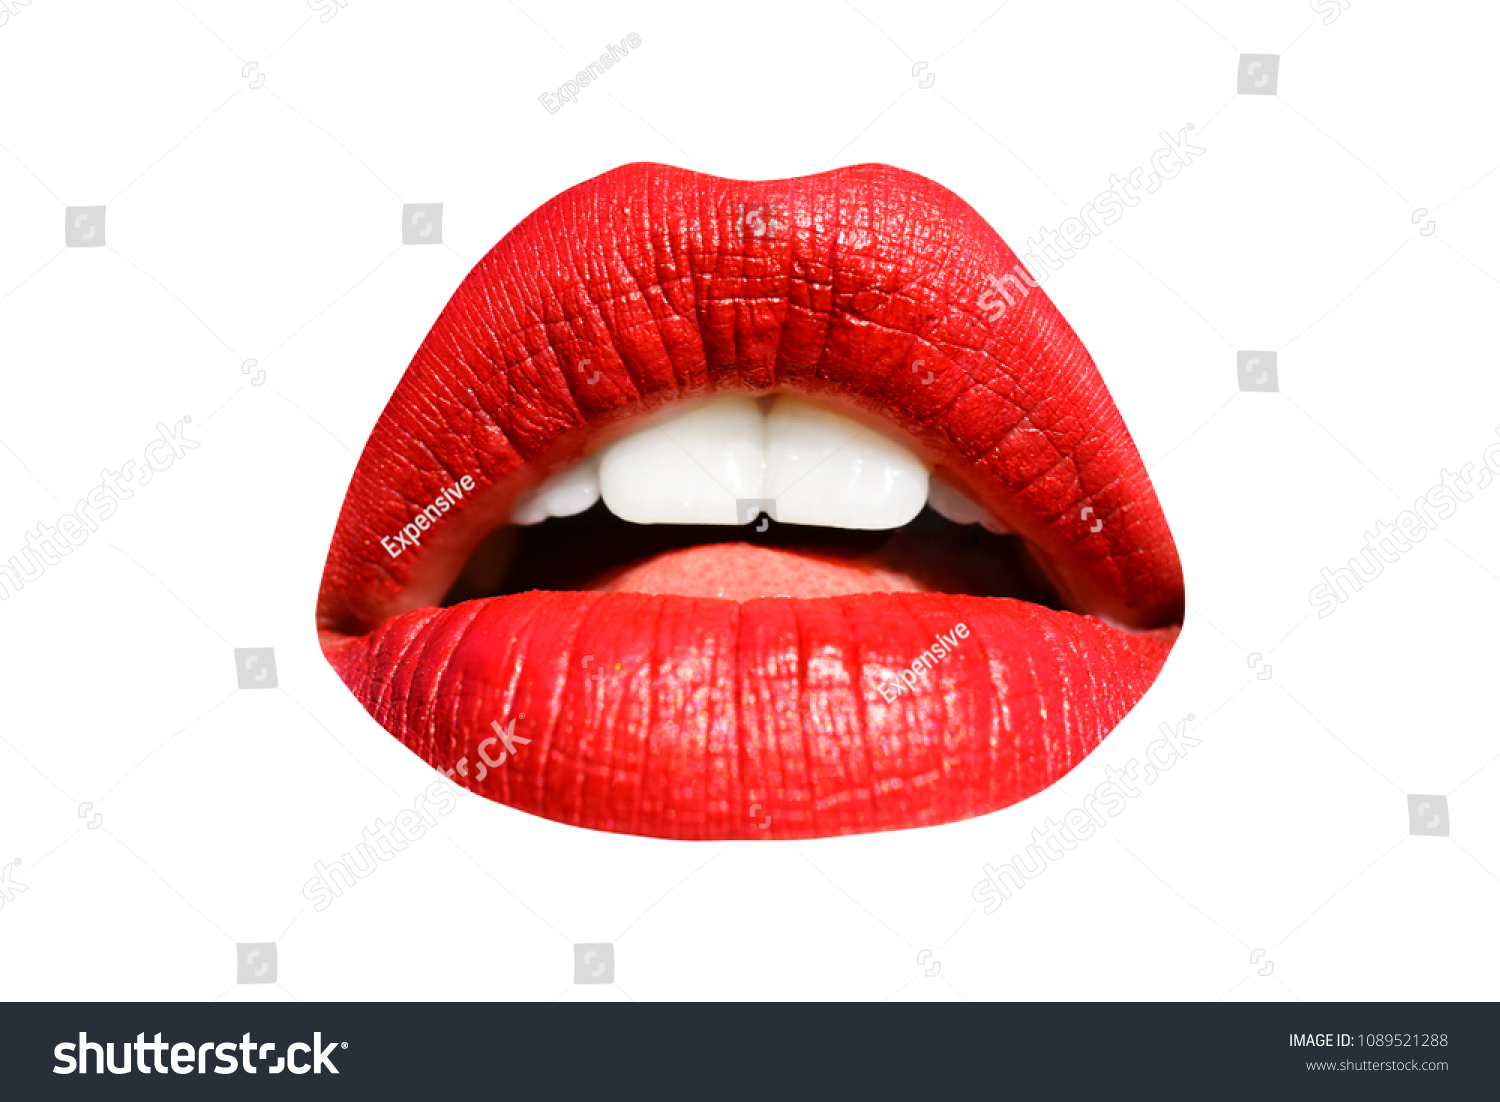 Lips, red lipstick, mouth isolated on white background with white teeth. Sexy kiss, girl smile, female mouth close up, sensual seductive tongue in the mouth of a young woman cosmetics. Cosmetology #1089521288